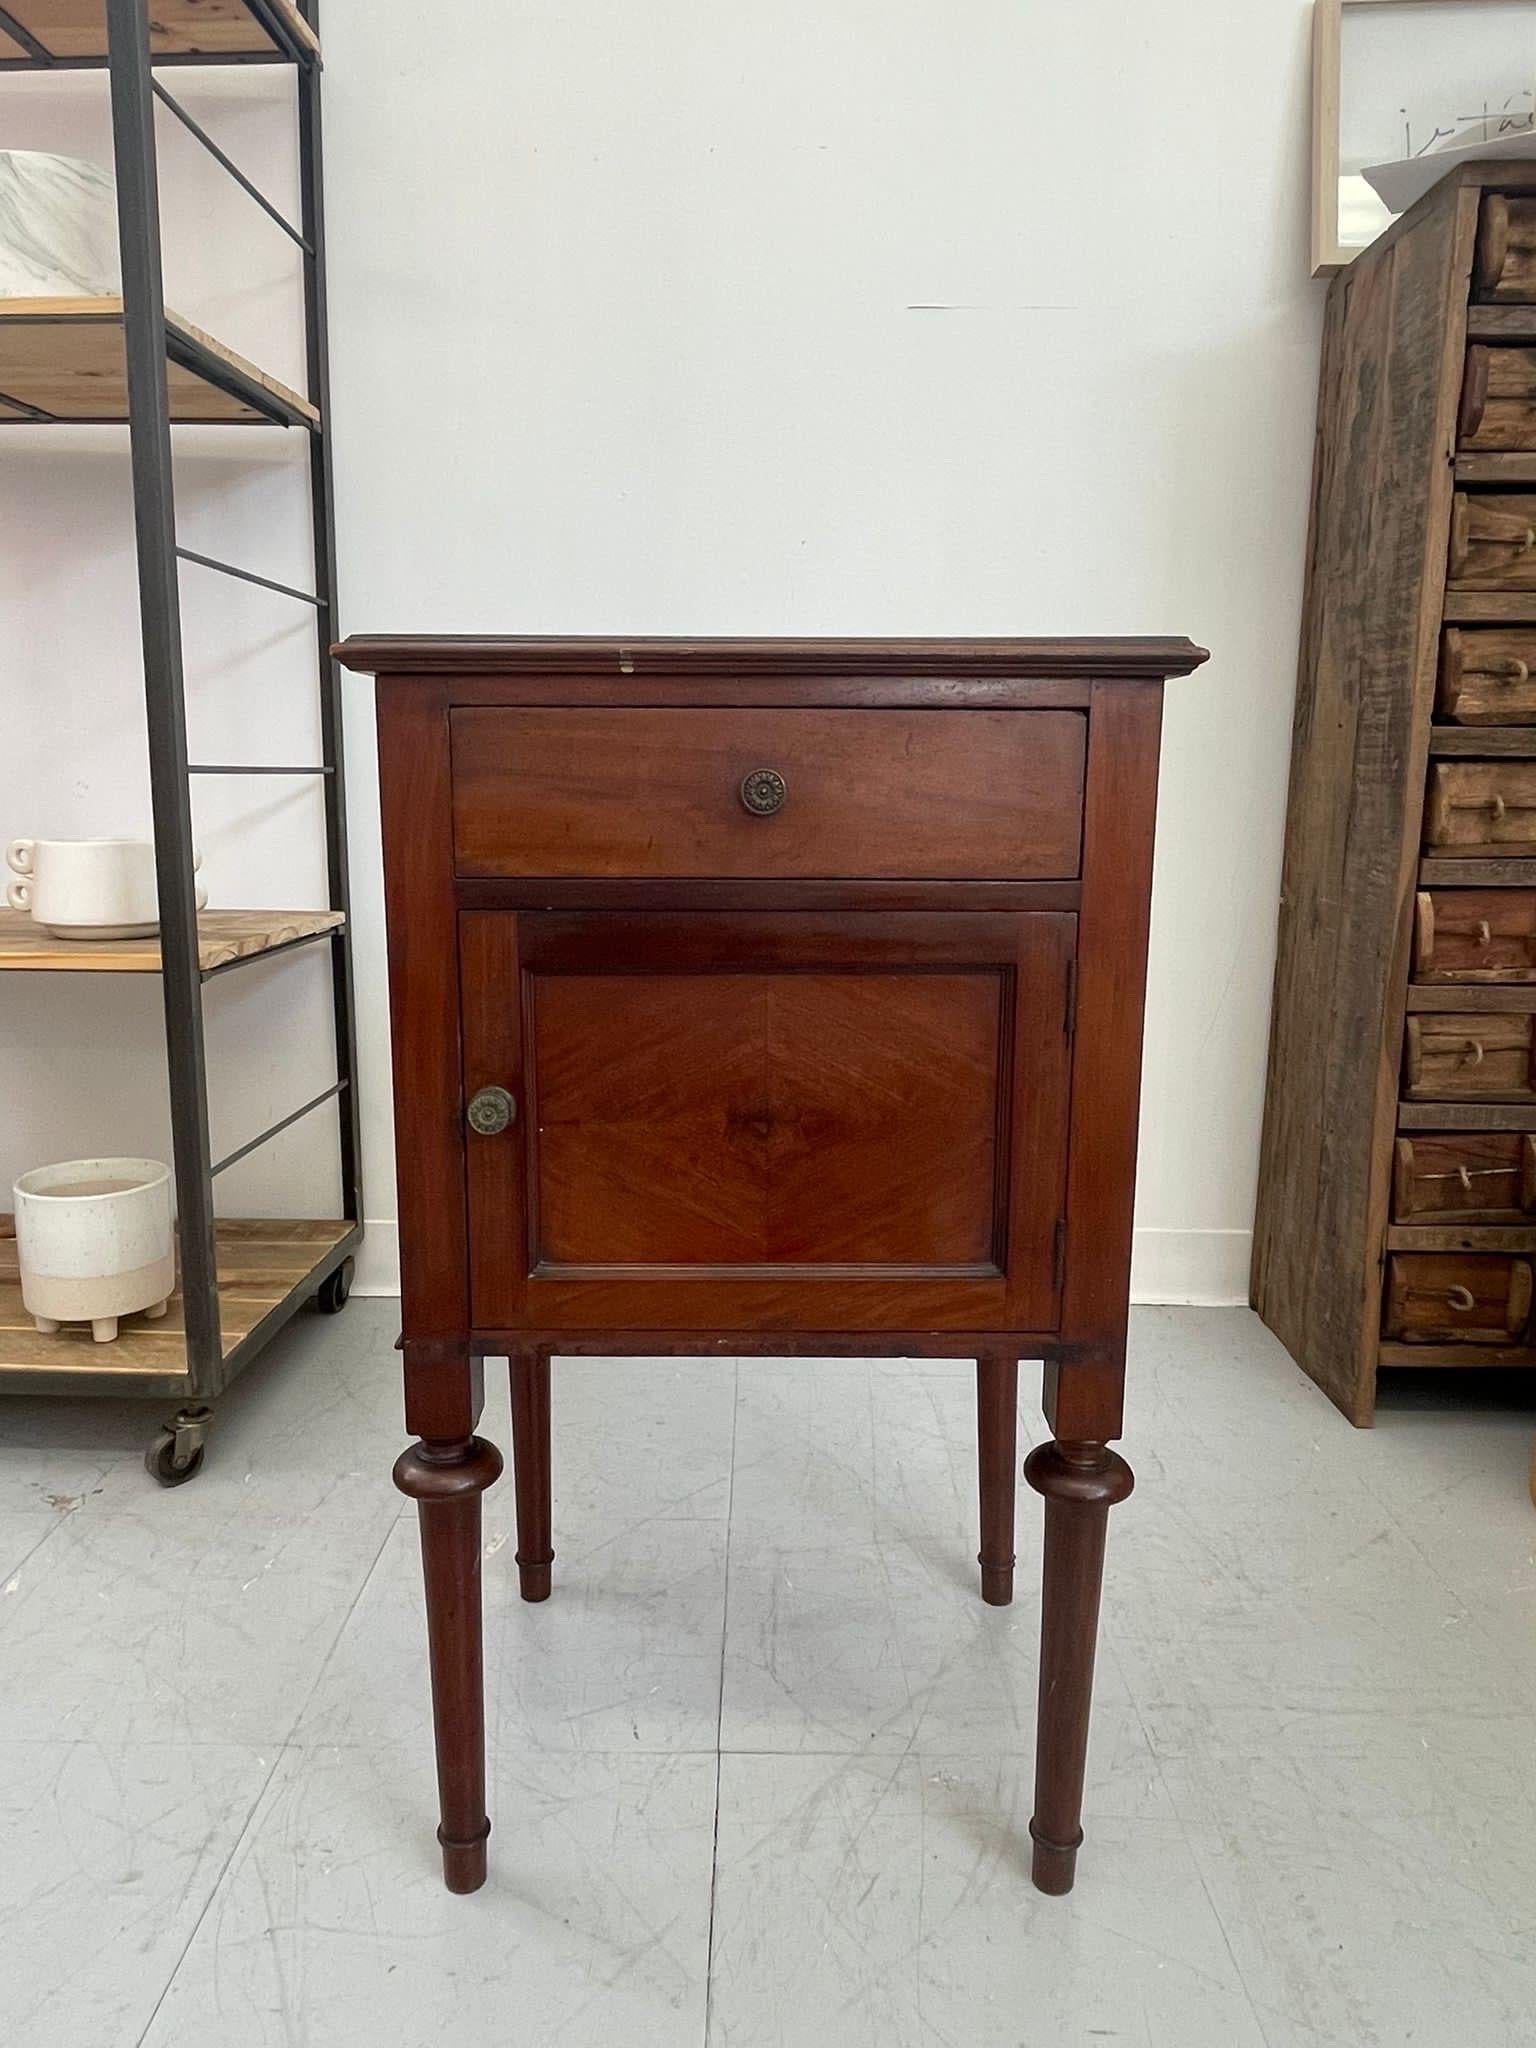 Antique Style Table with Single Drawer and Cabinet. The Wood has Nice Patins and Character. Unique Hardware and Legs as and Pictured. Vintage wear Consistent with Age.

Dimensions. 15 W ; 13 D ; 29 1/2 H